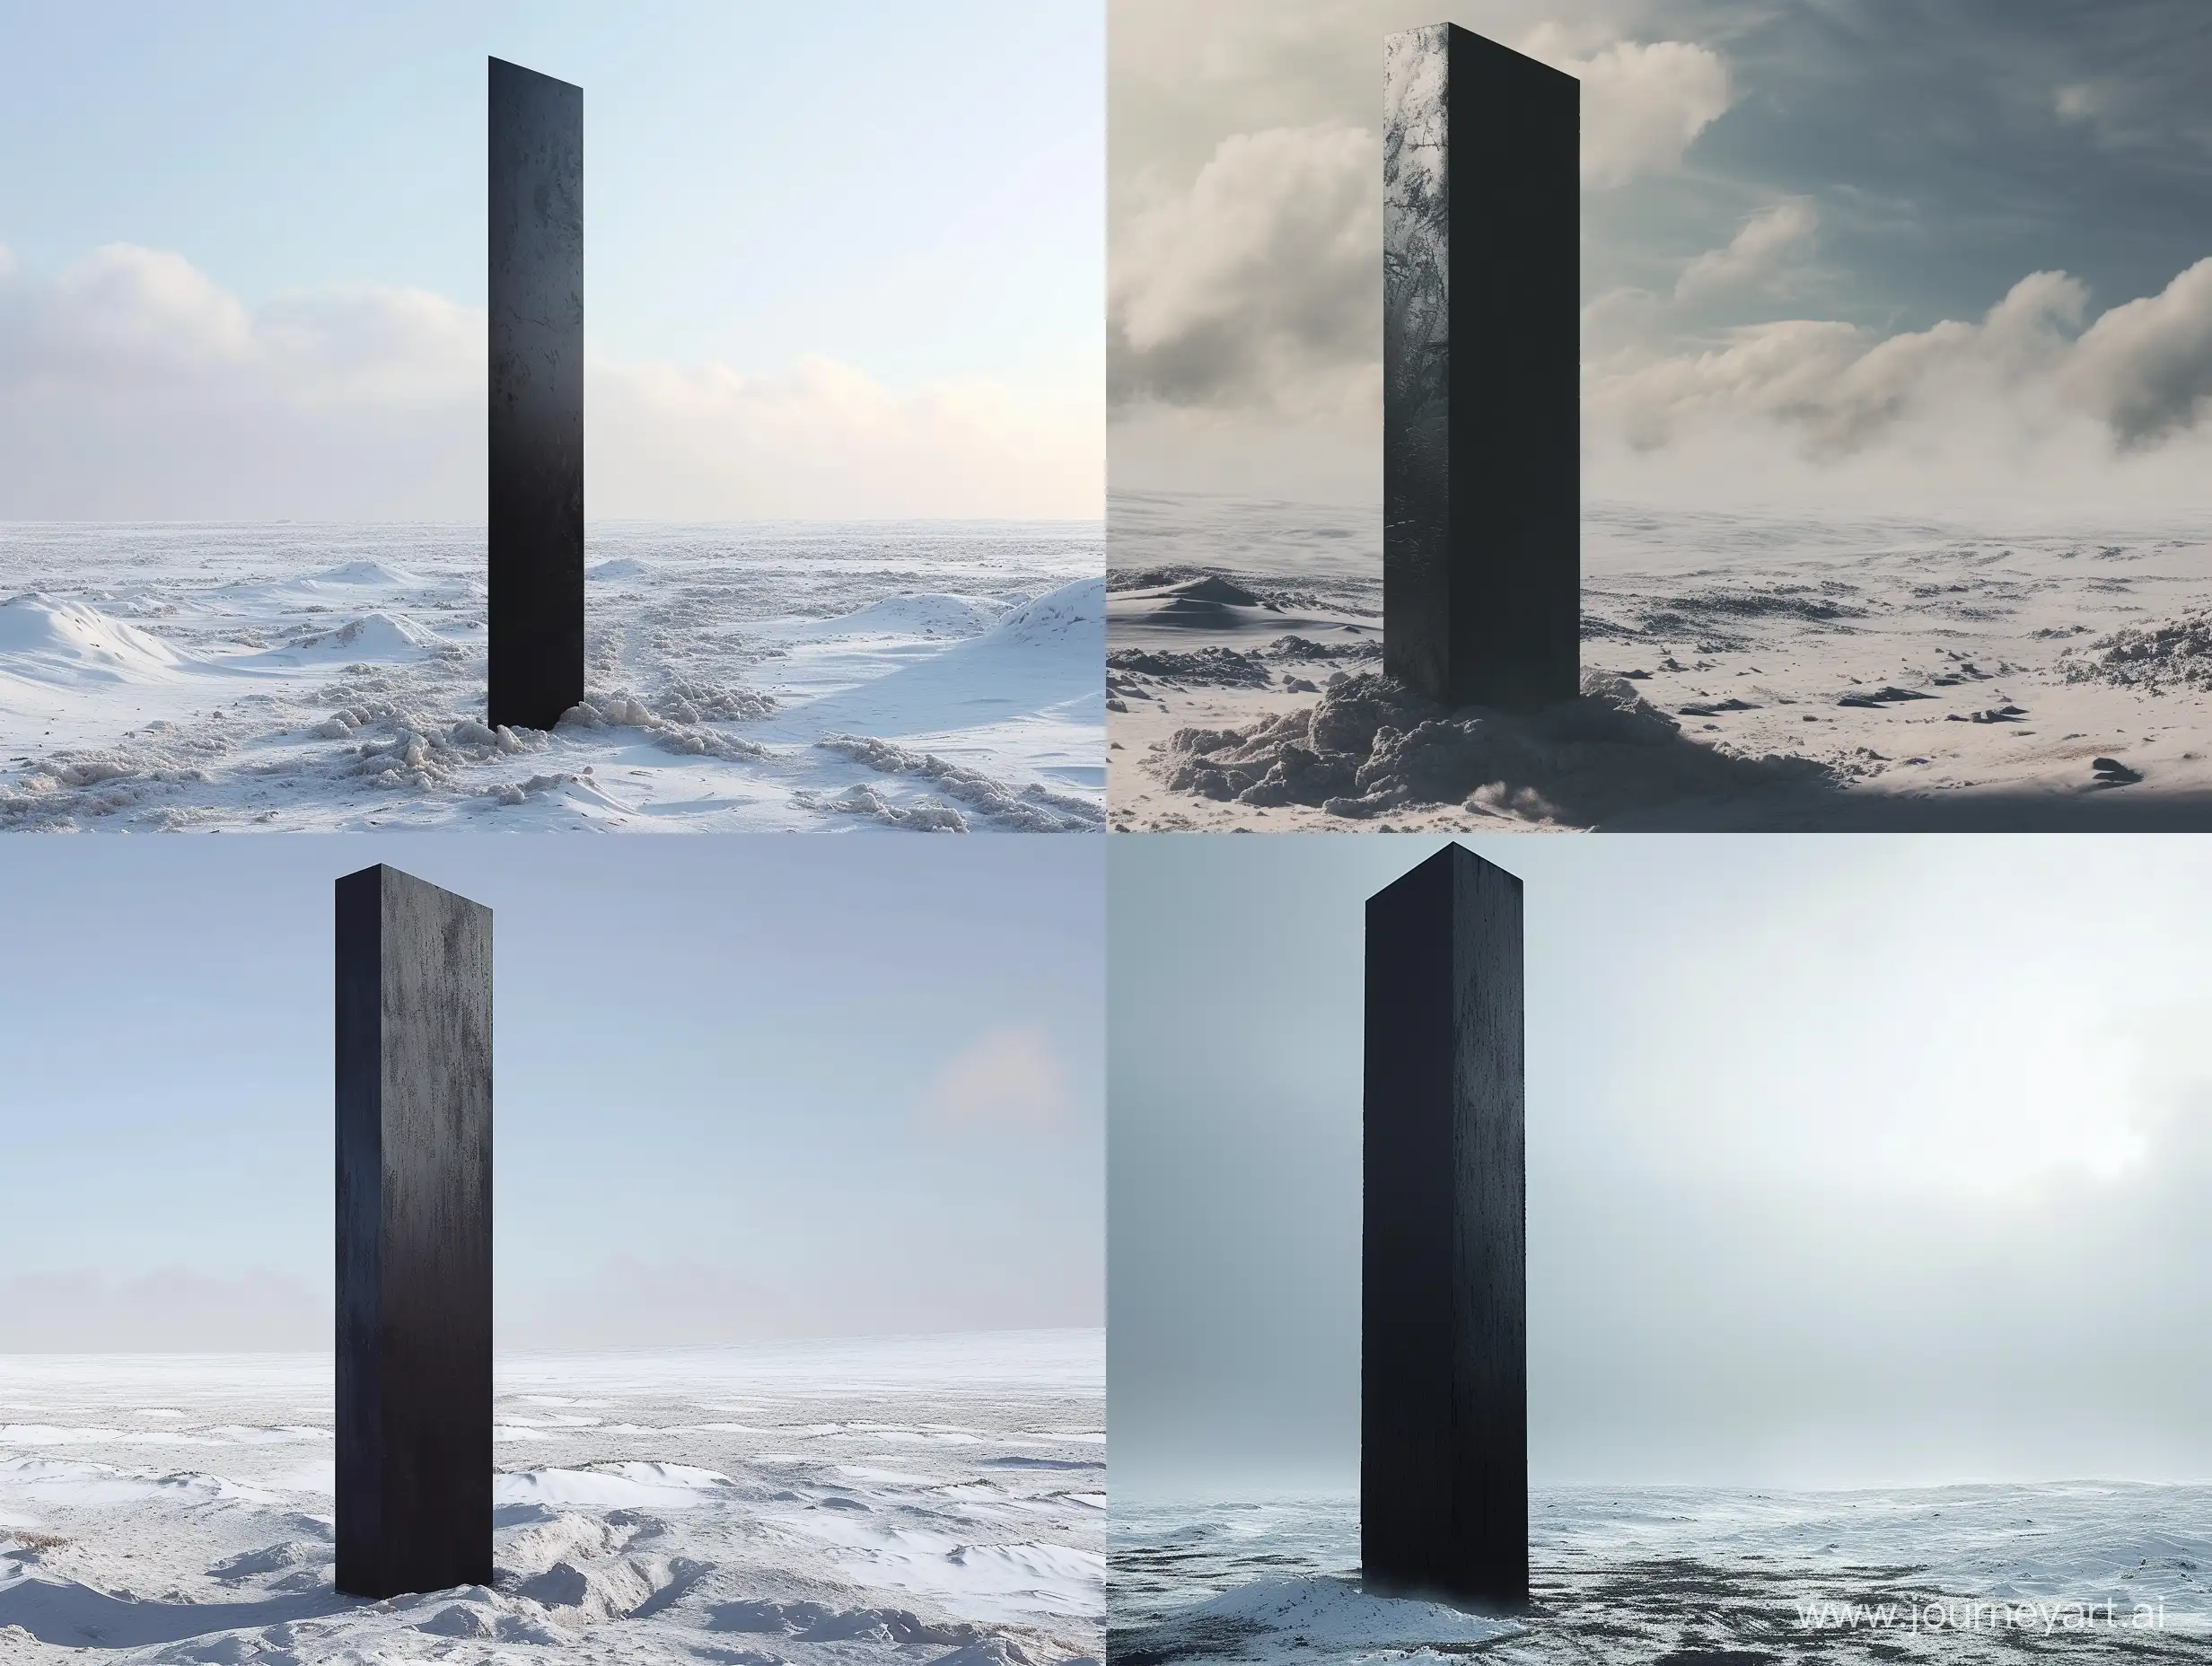 Mysterious-Black-Monolith-Towering-in-Snowy-Wilderness